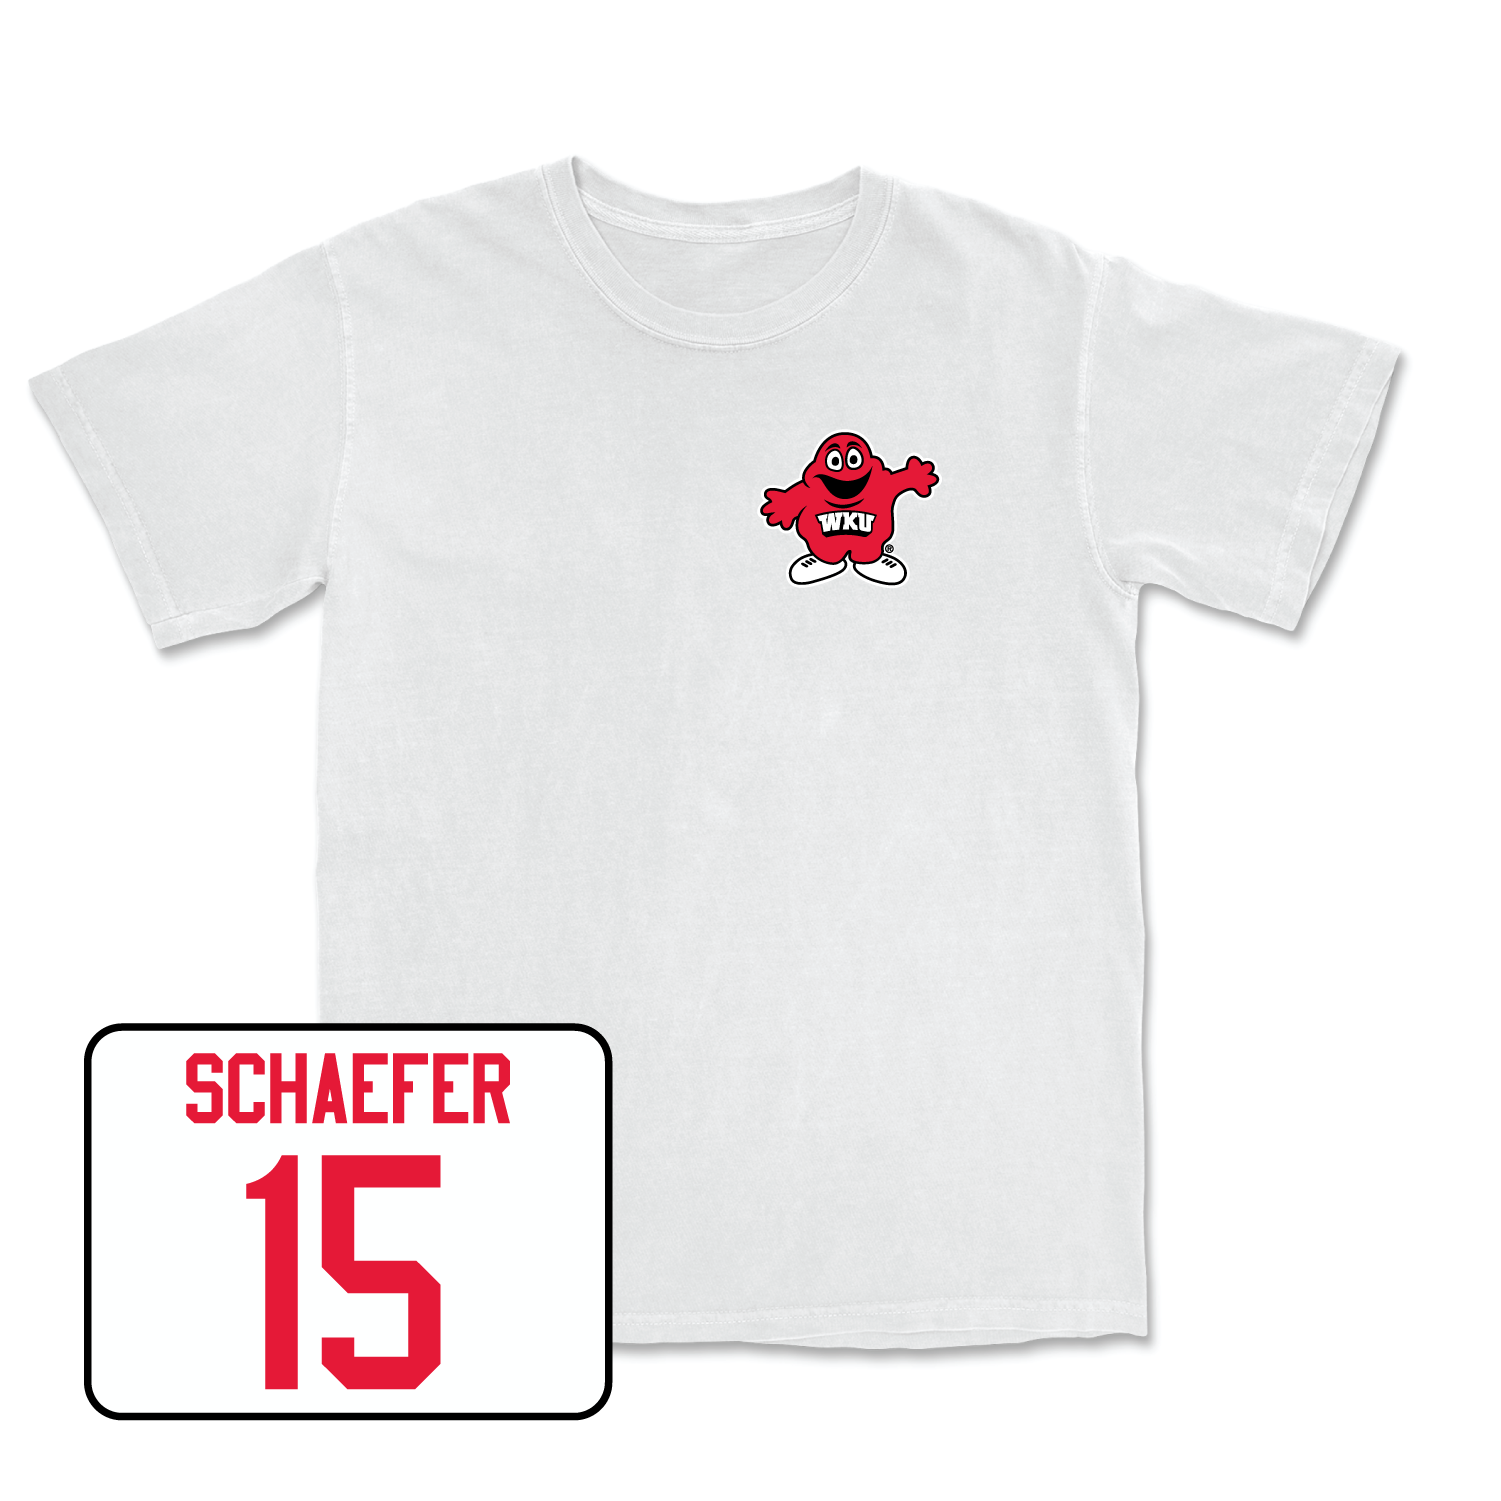 White Women's Volleyball Big Red Comfort Colors Tee 4X-Large / Abigail Schaefer | #15